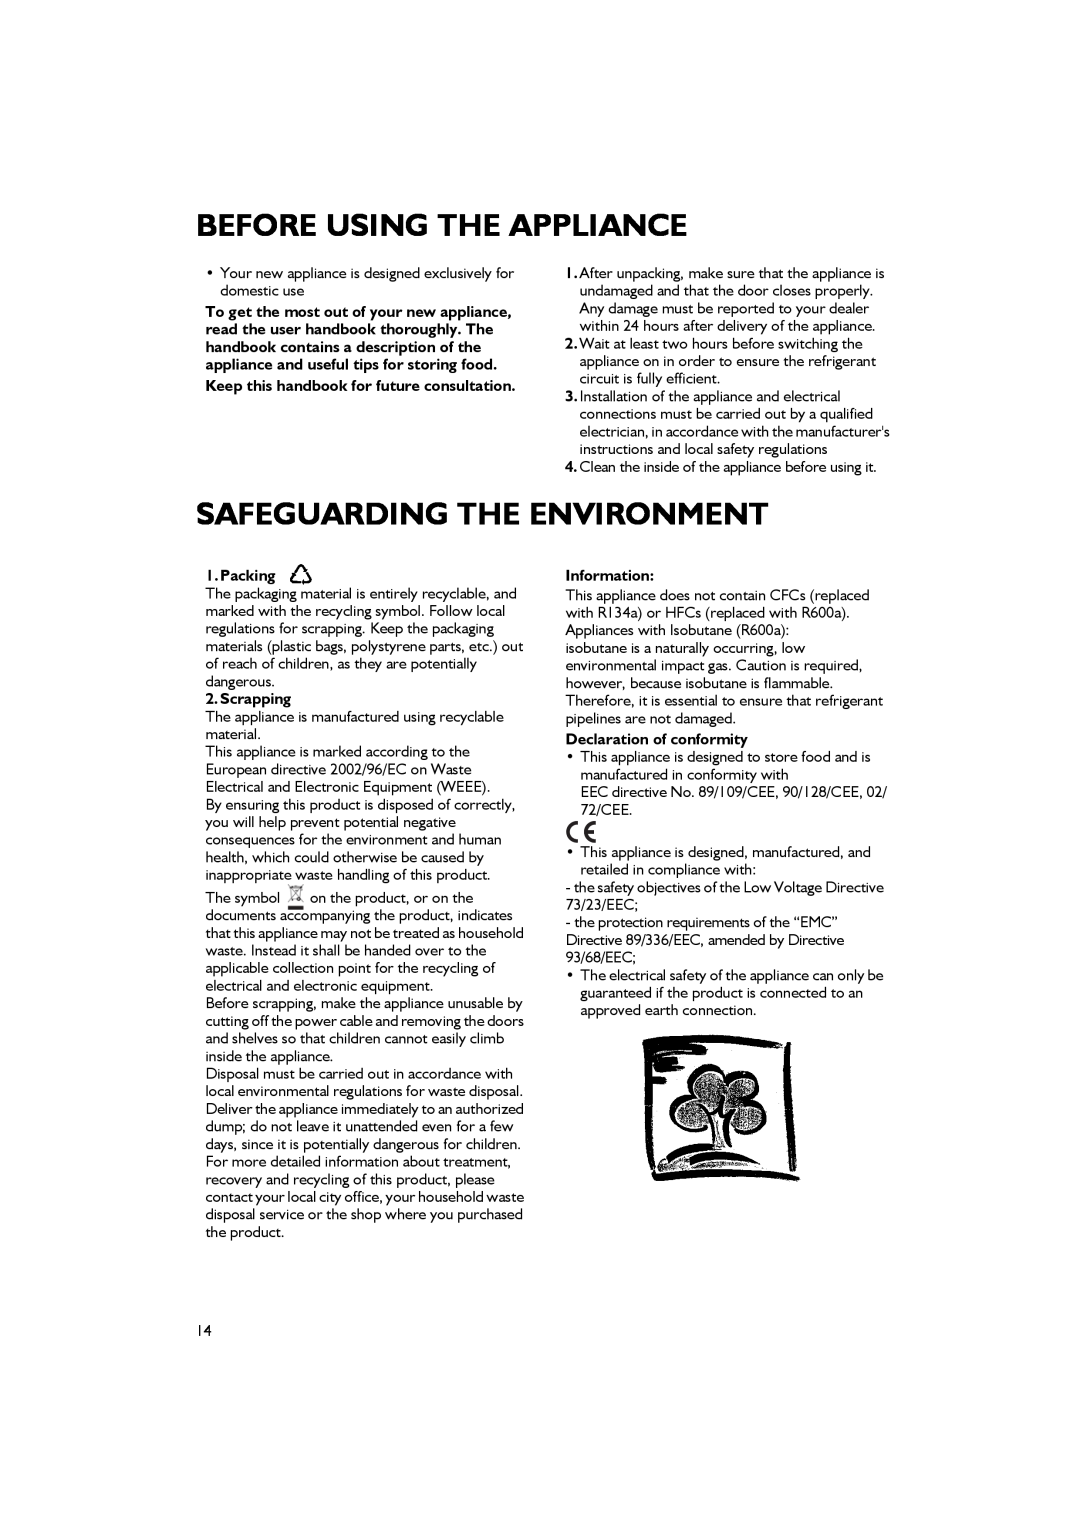 Smeg CR324A7 Before Using The Appliance, Safeguarding The Environment, Keep this handbook for future consultation, Packing 